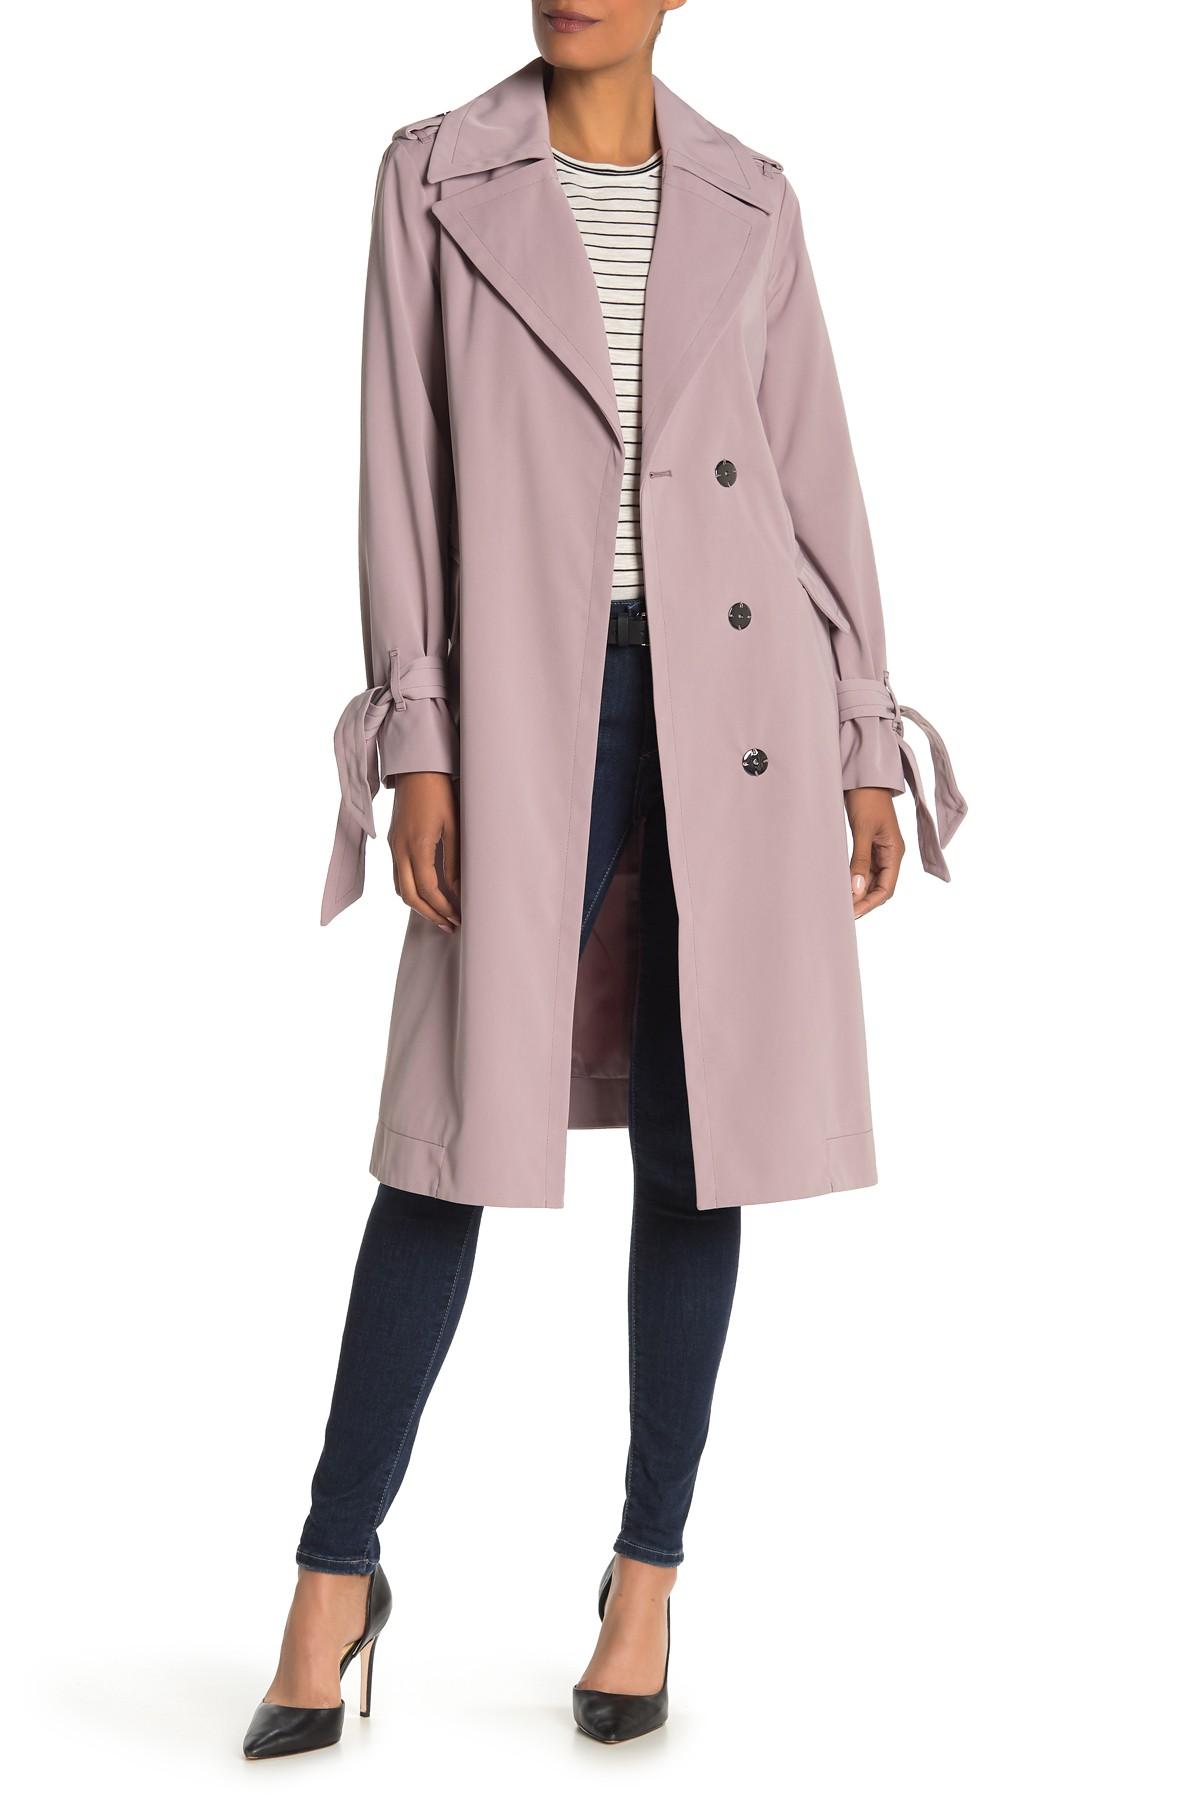 London Fog Synthetic Solid Snap Tie Front Trench Coat in Heather (Pink ...